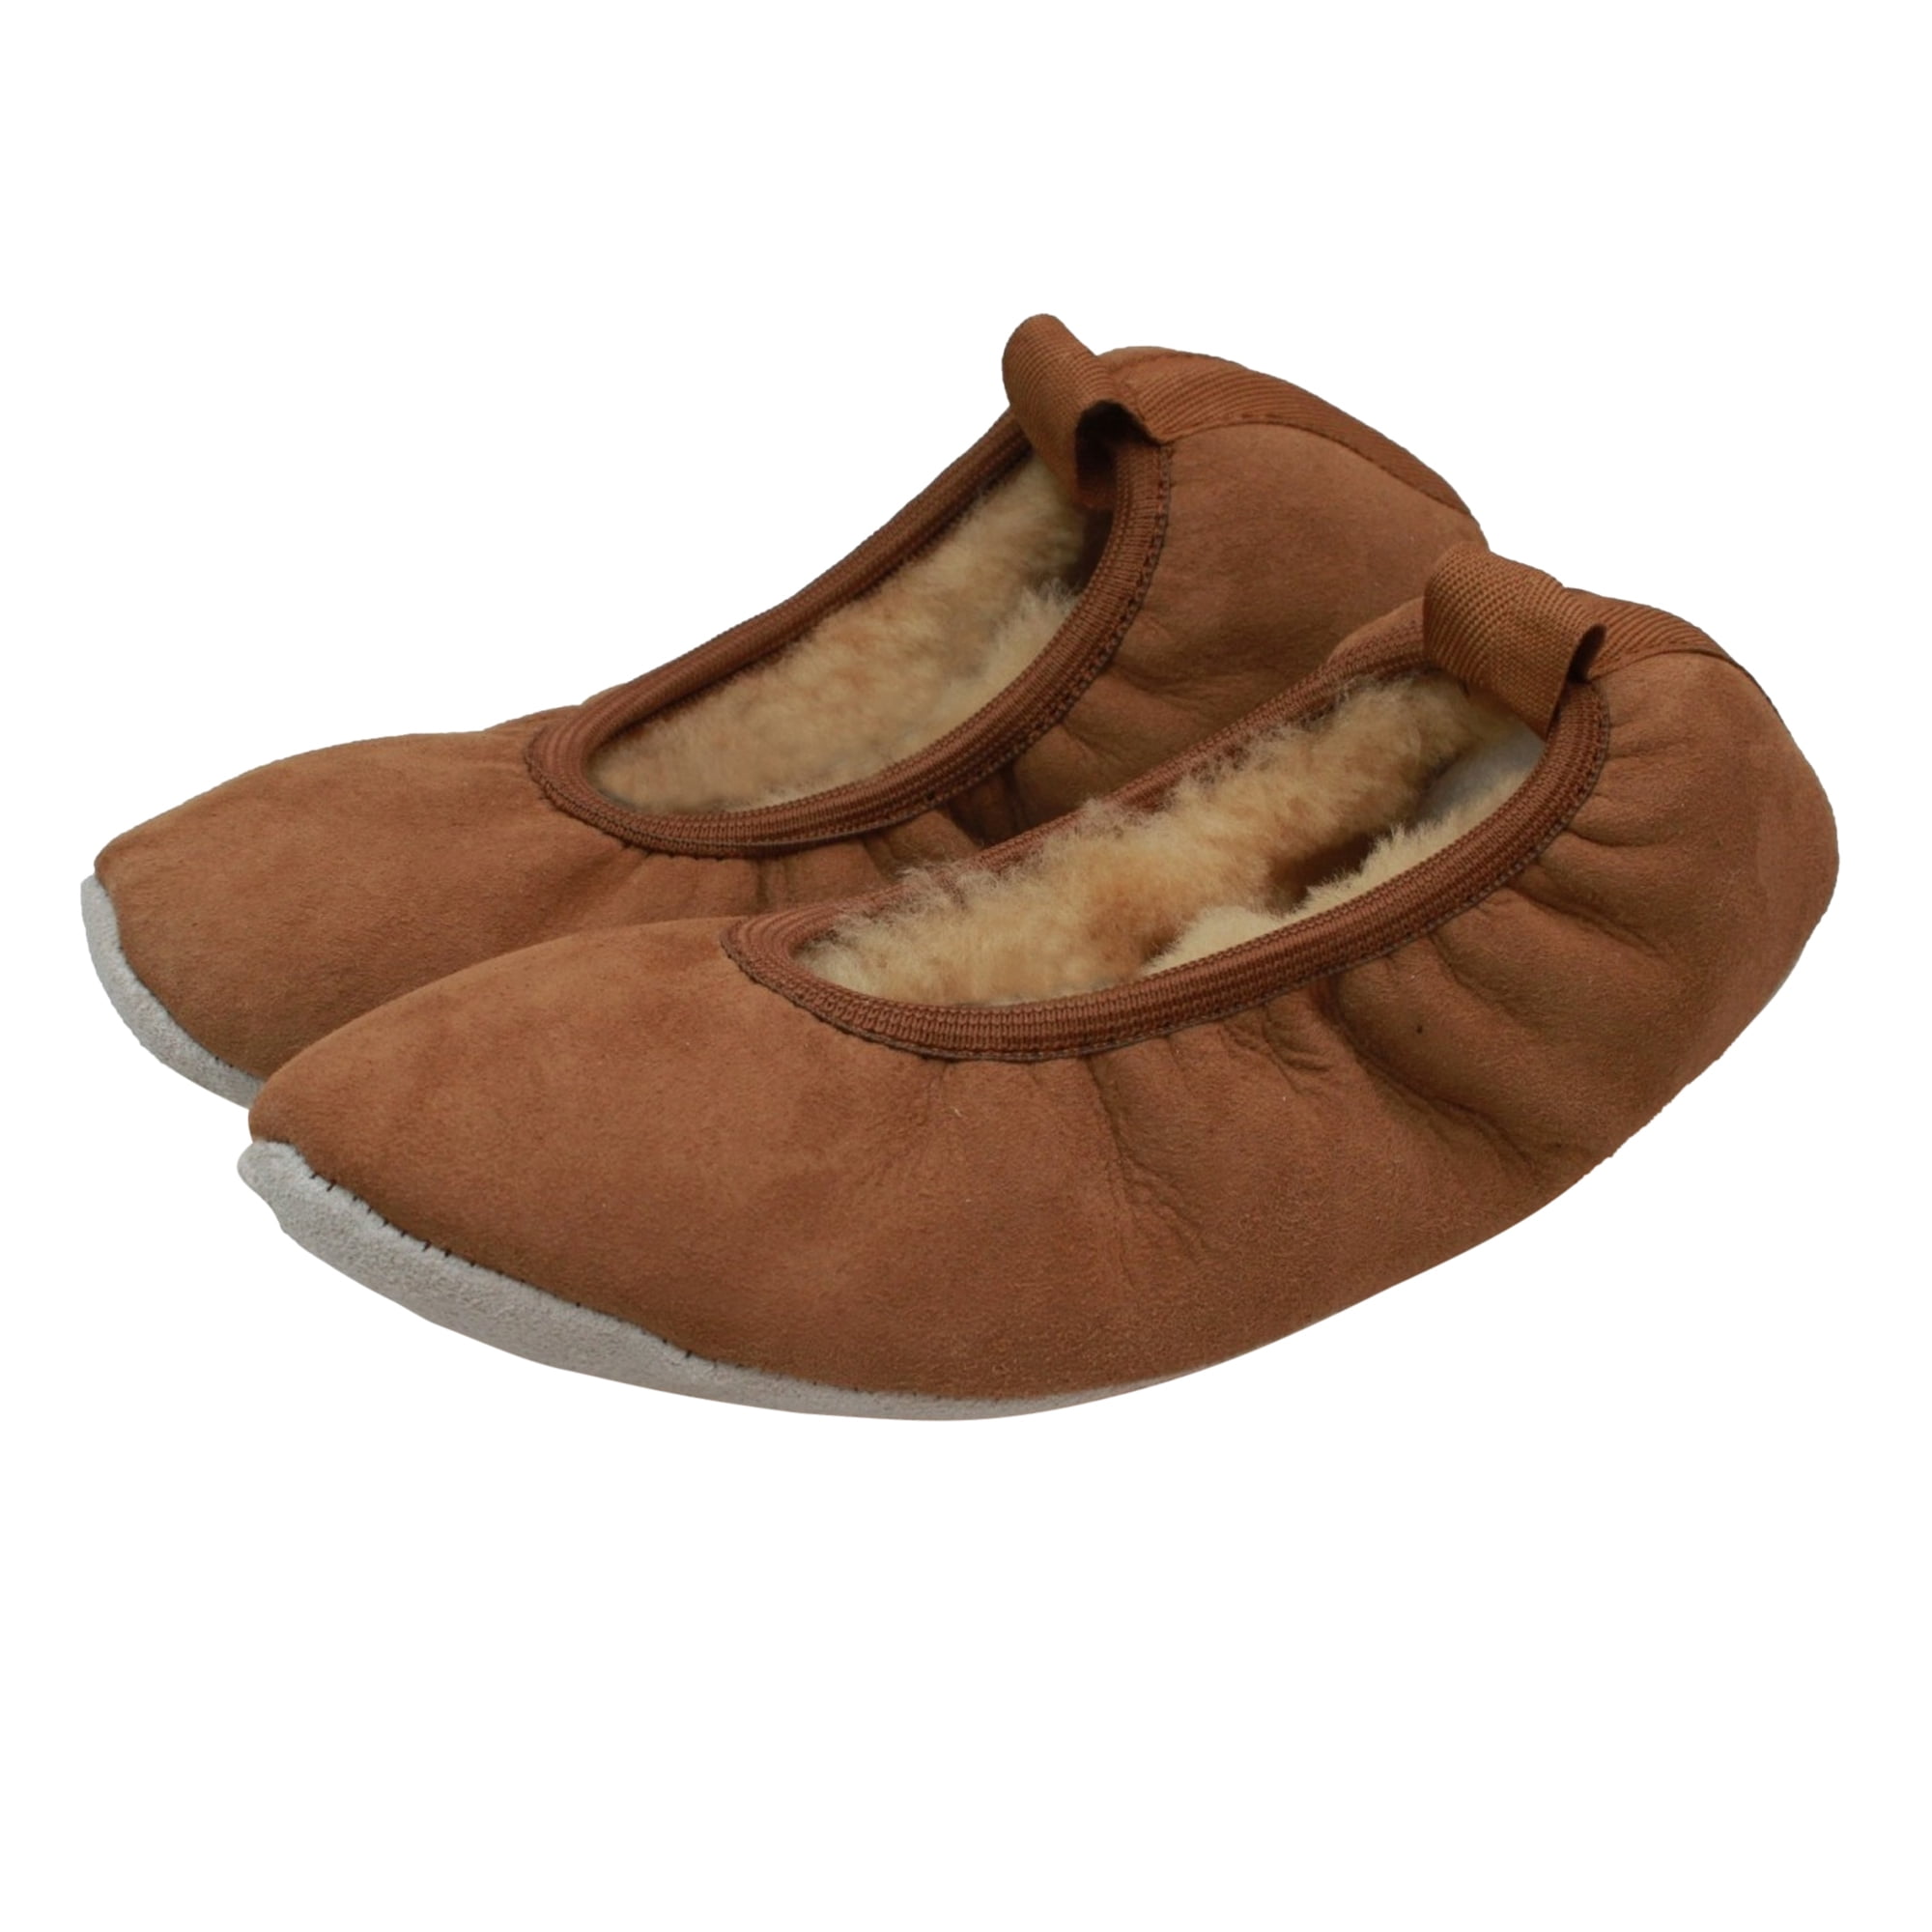 Eastern Counties Leather Womens Sheepskin Lined Ballerina Slippers -